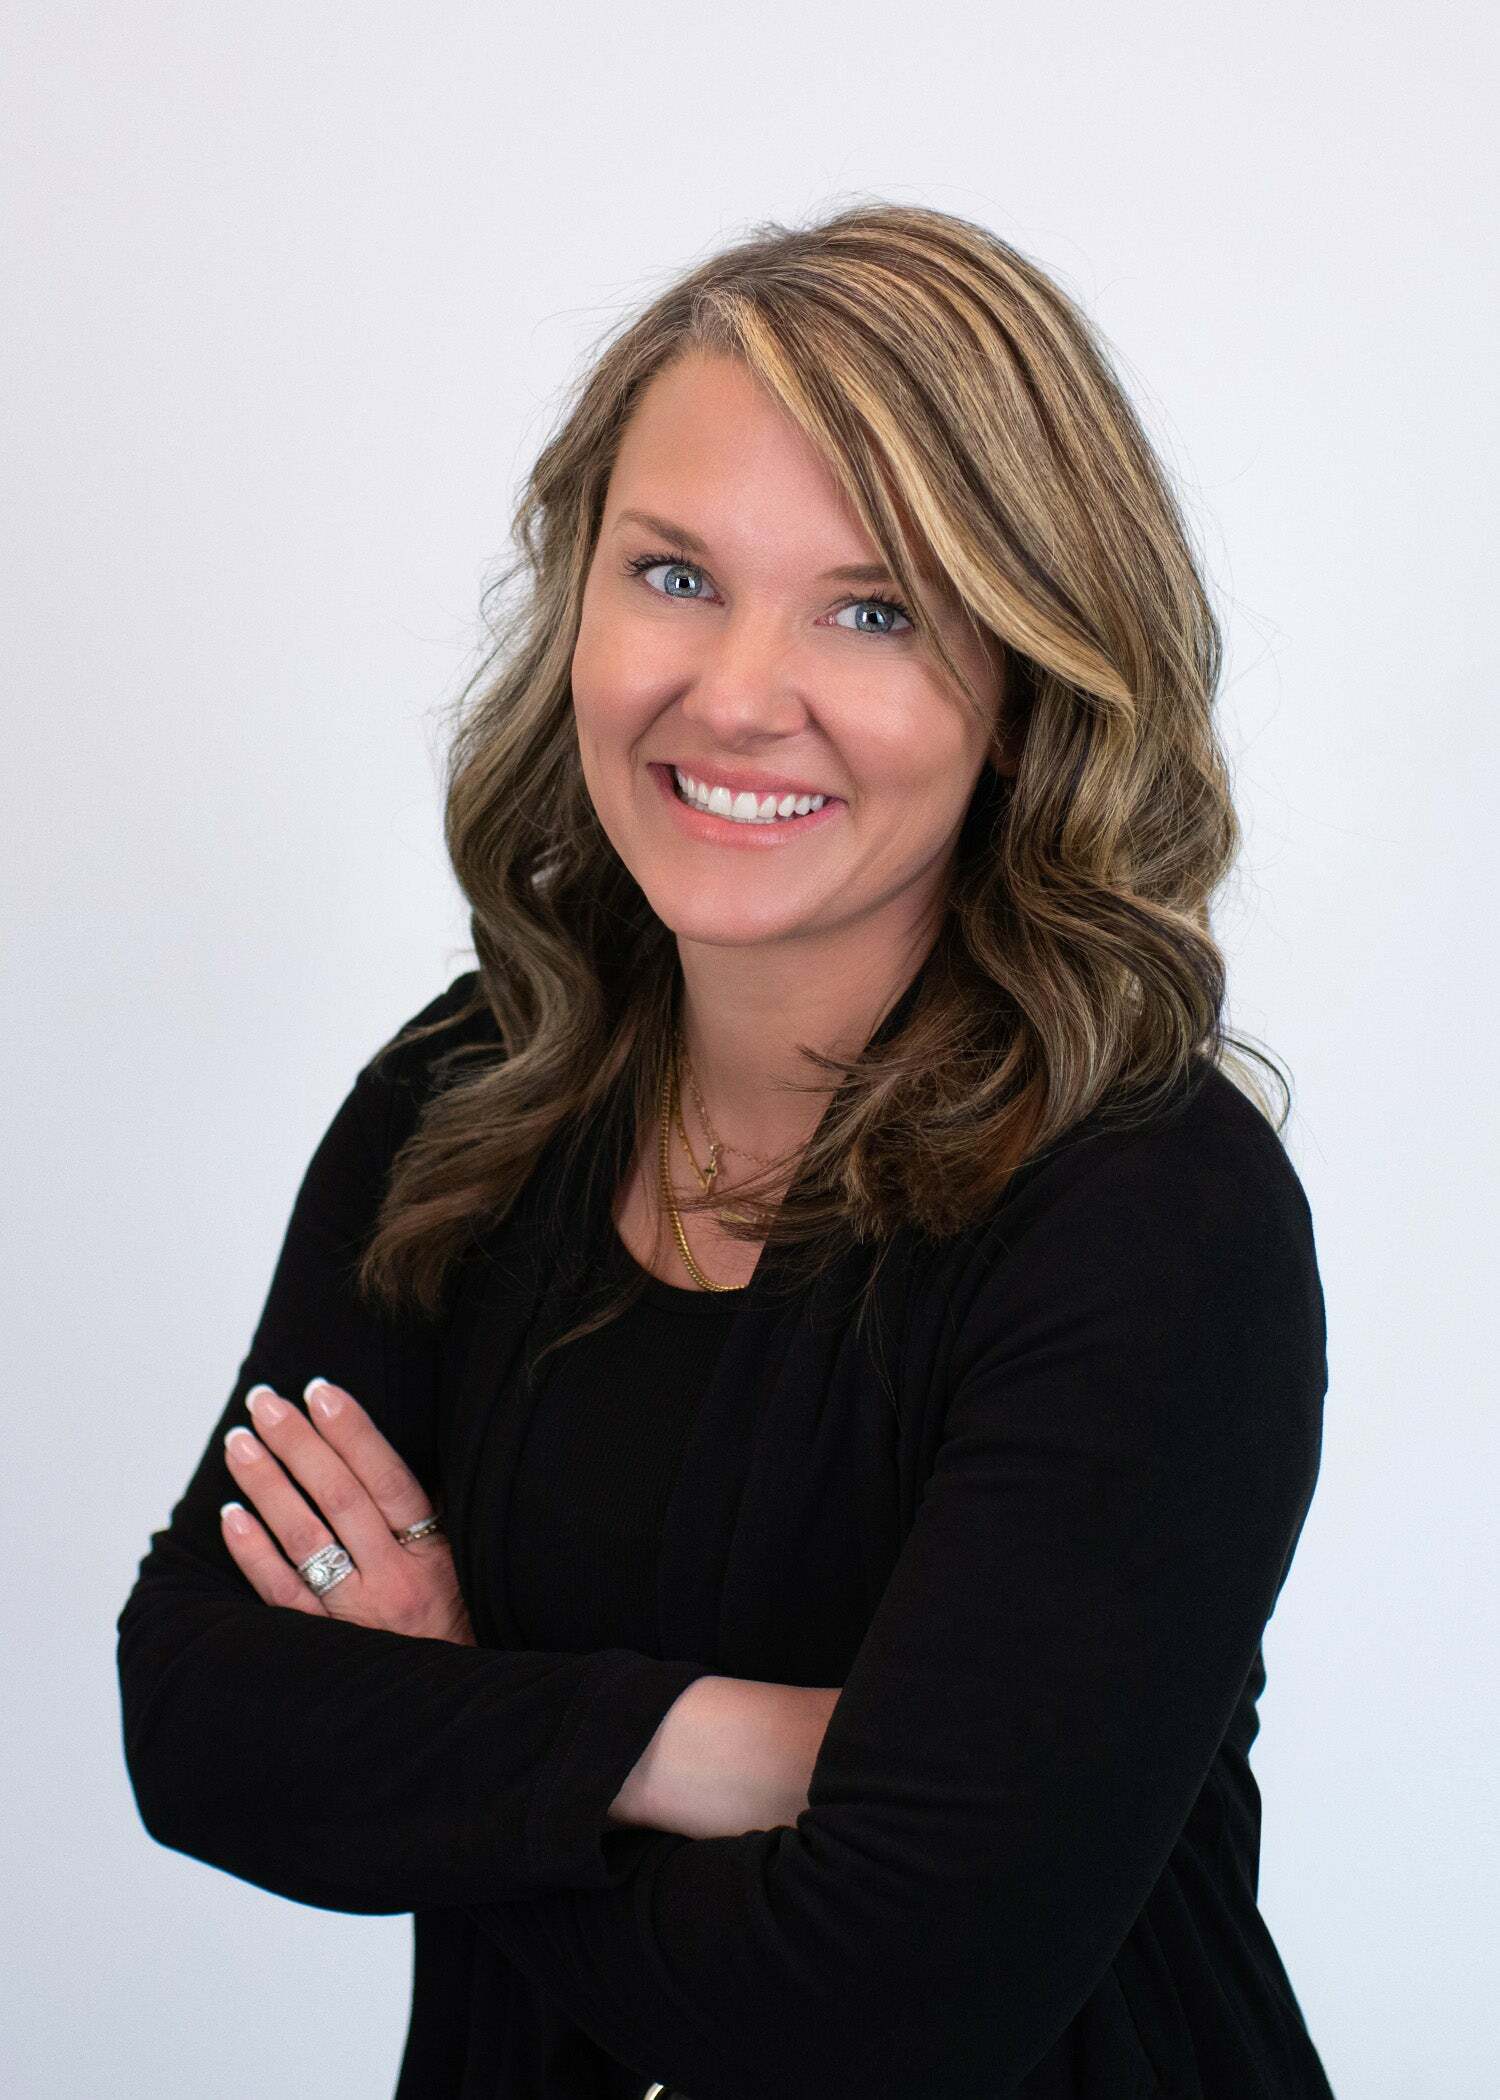 Kelsie Knight, Real Estate Salesperson in Richland, Tri-Cities